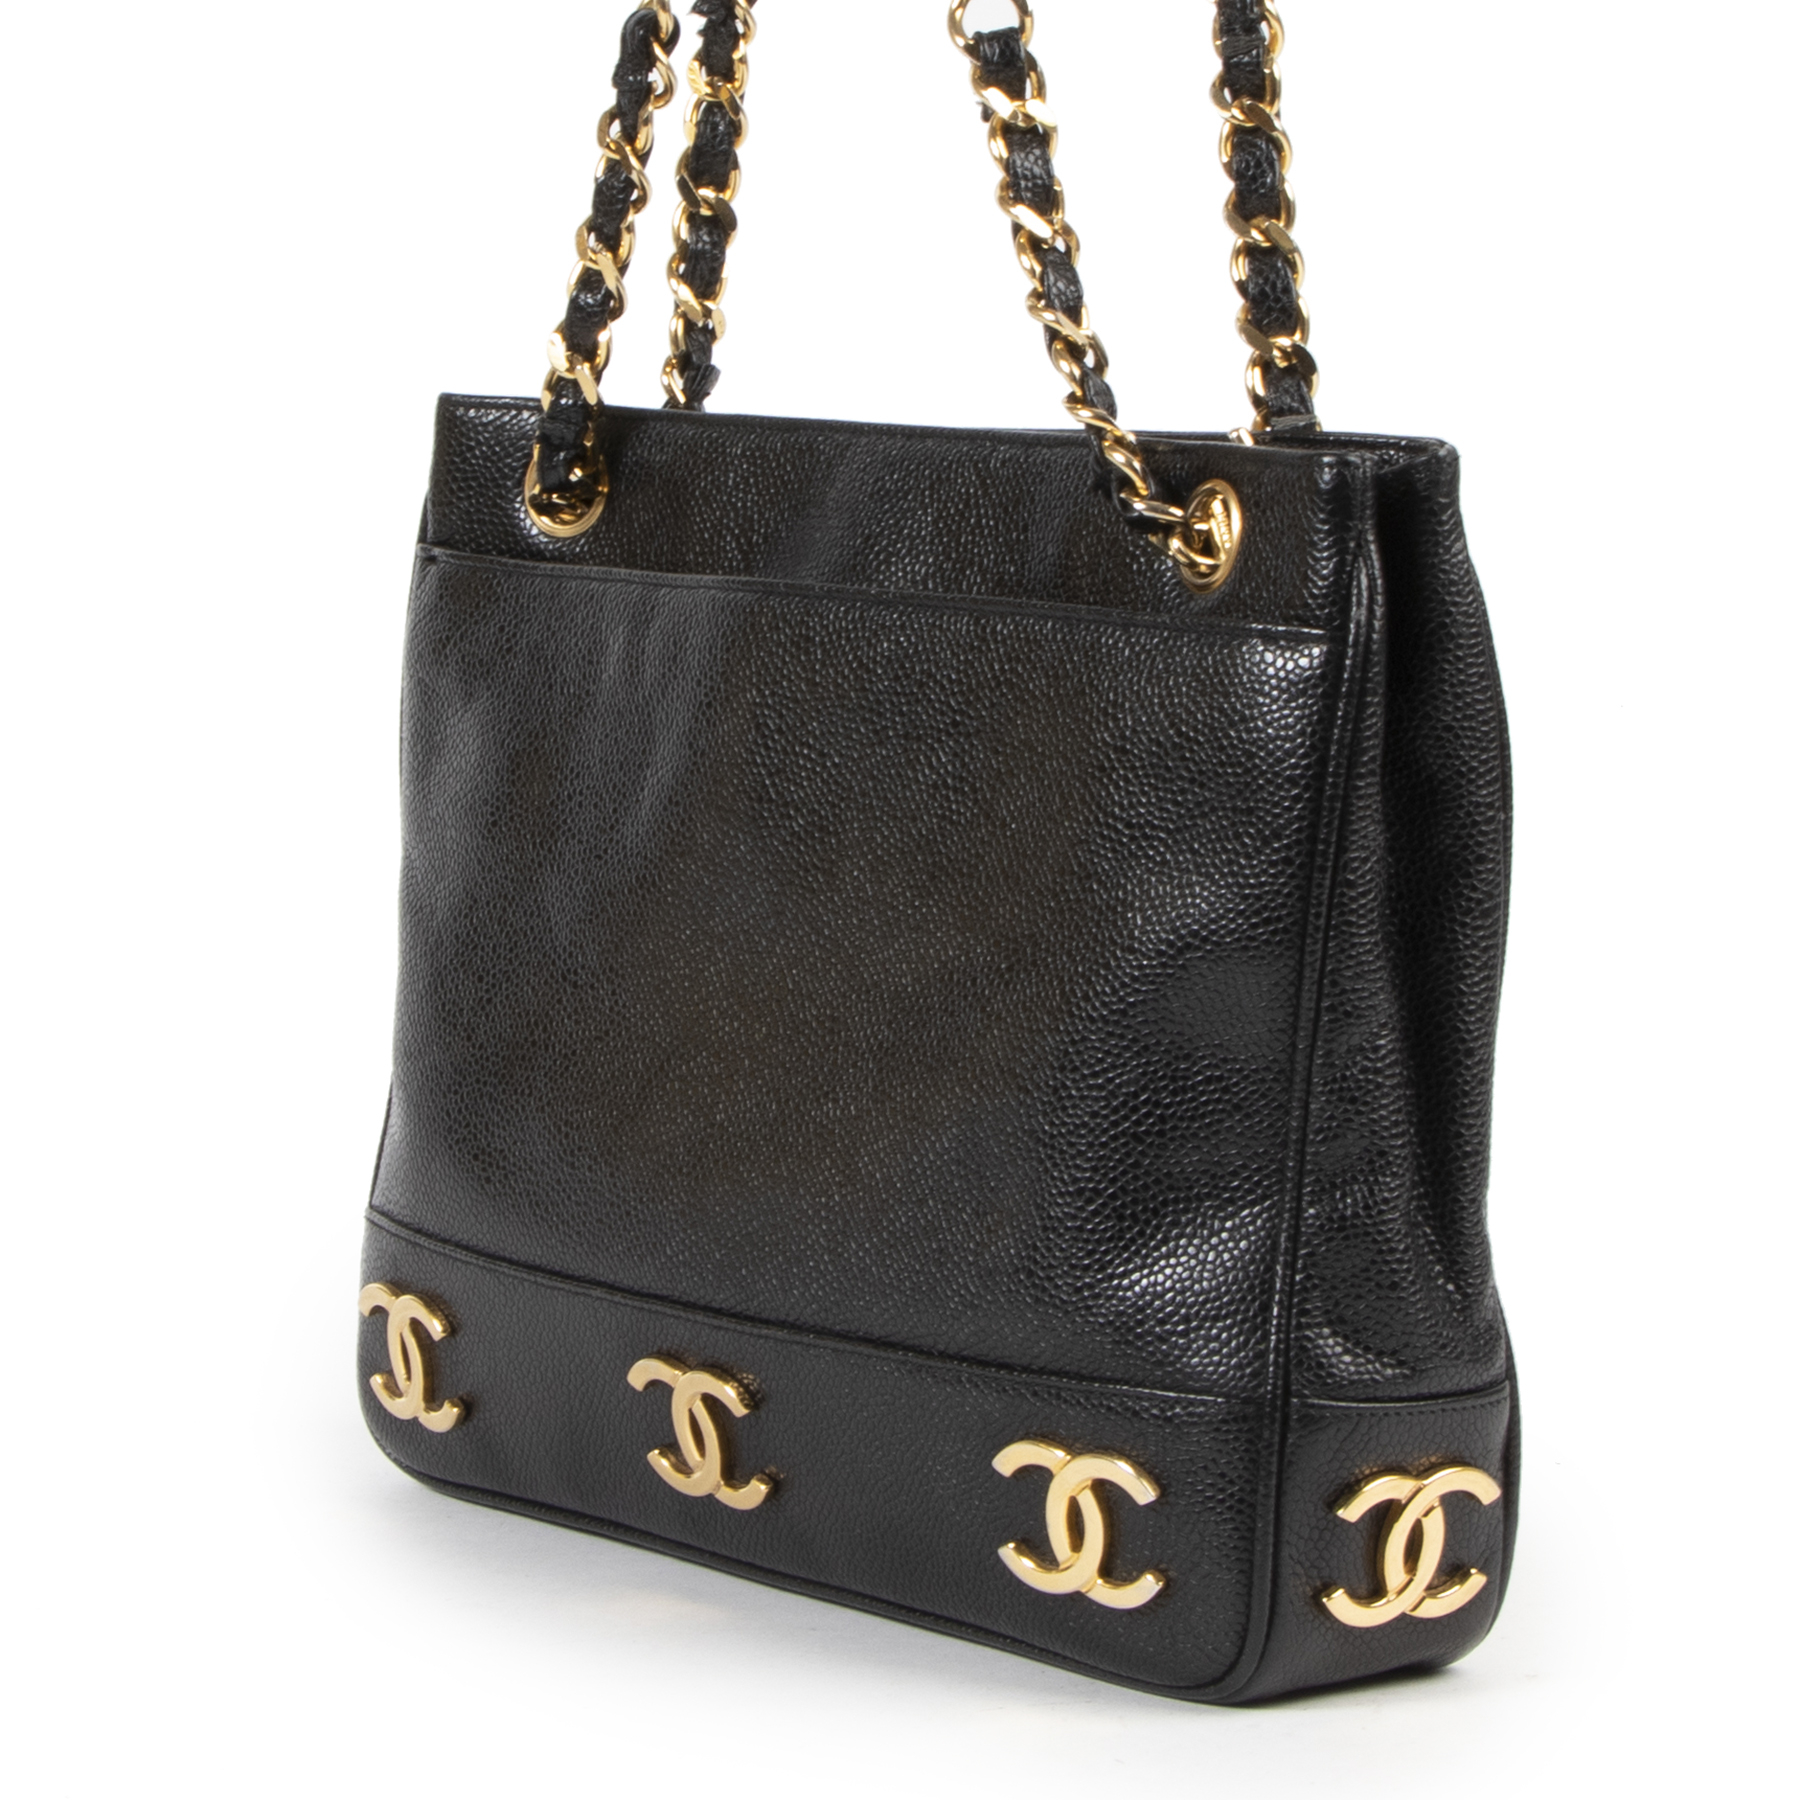 CHANEL, Bags, Chanel Vintage Buttery Leather Tote Bag